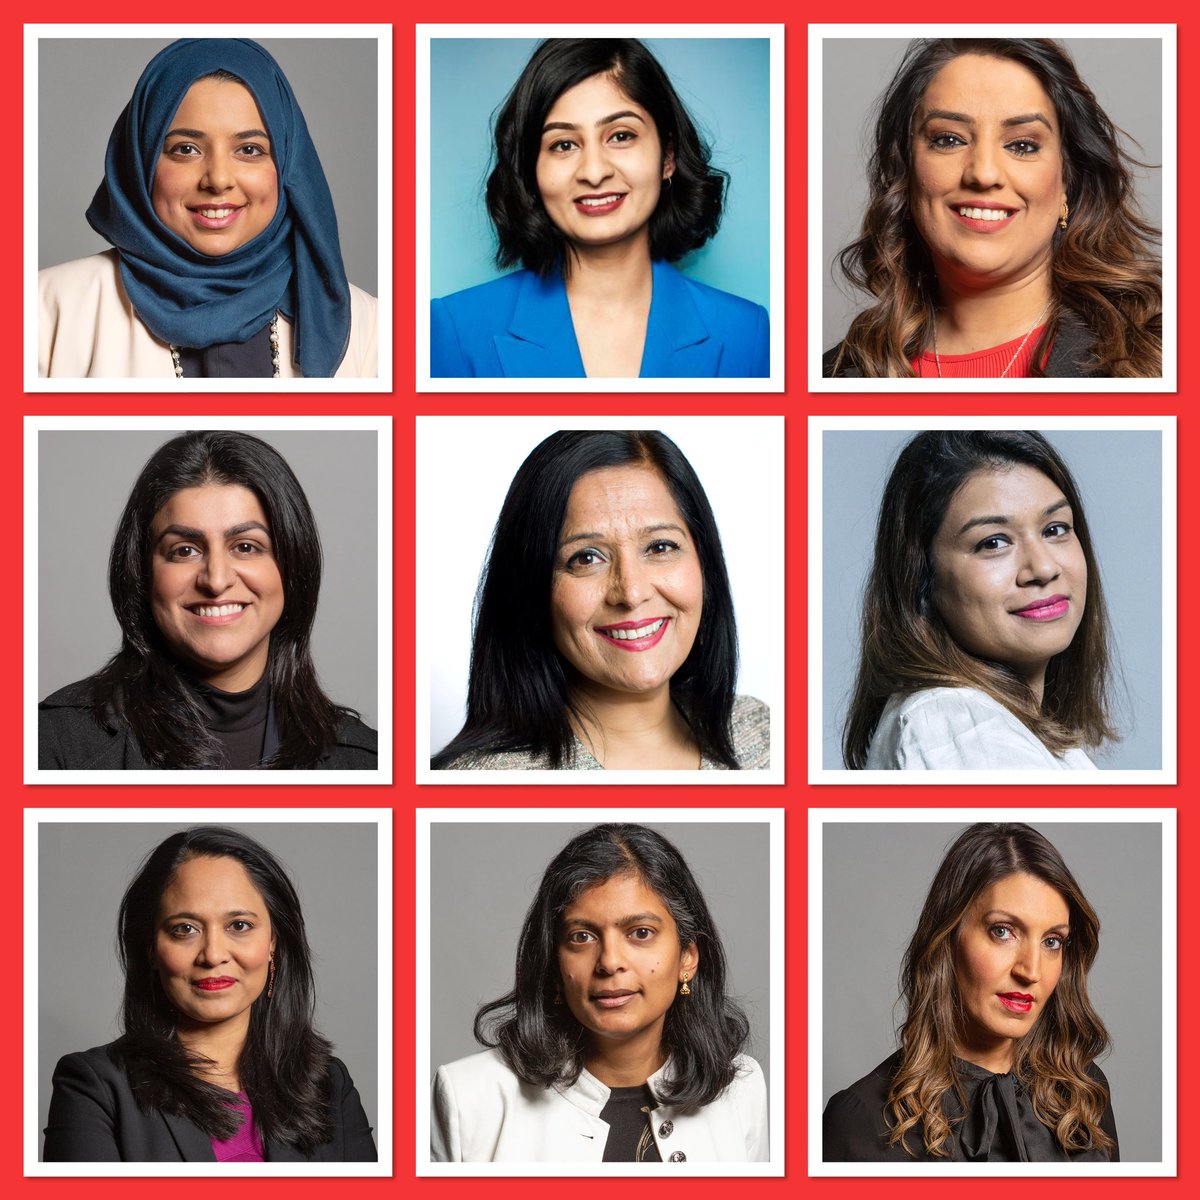 This #IWD2023 we want to recognise and thank the amazing Muslim women in Parliament who fight for our communities every day. Inspiring and courageous, often in the face of adversity.